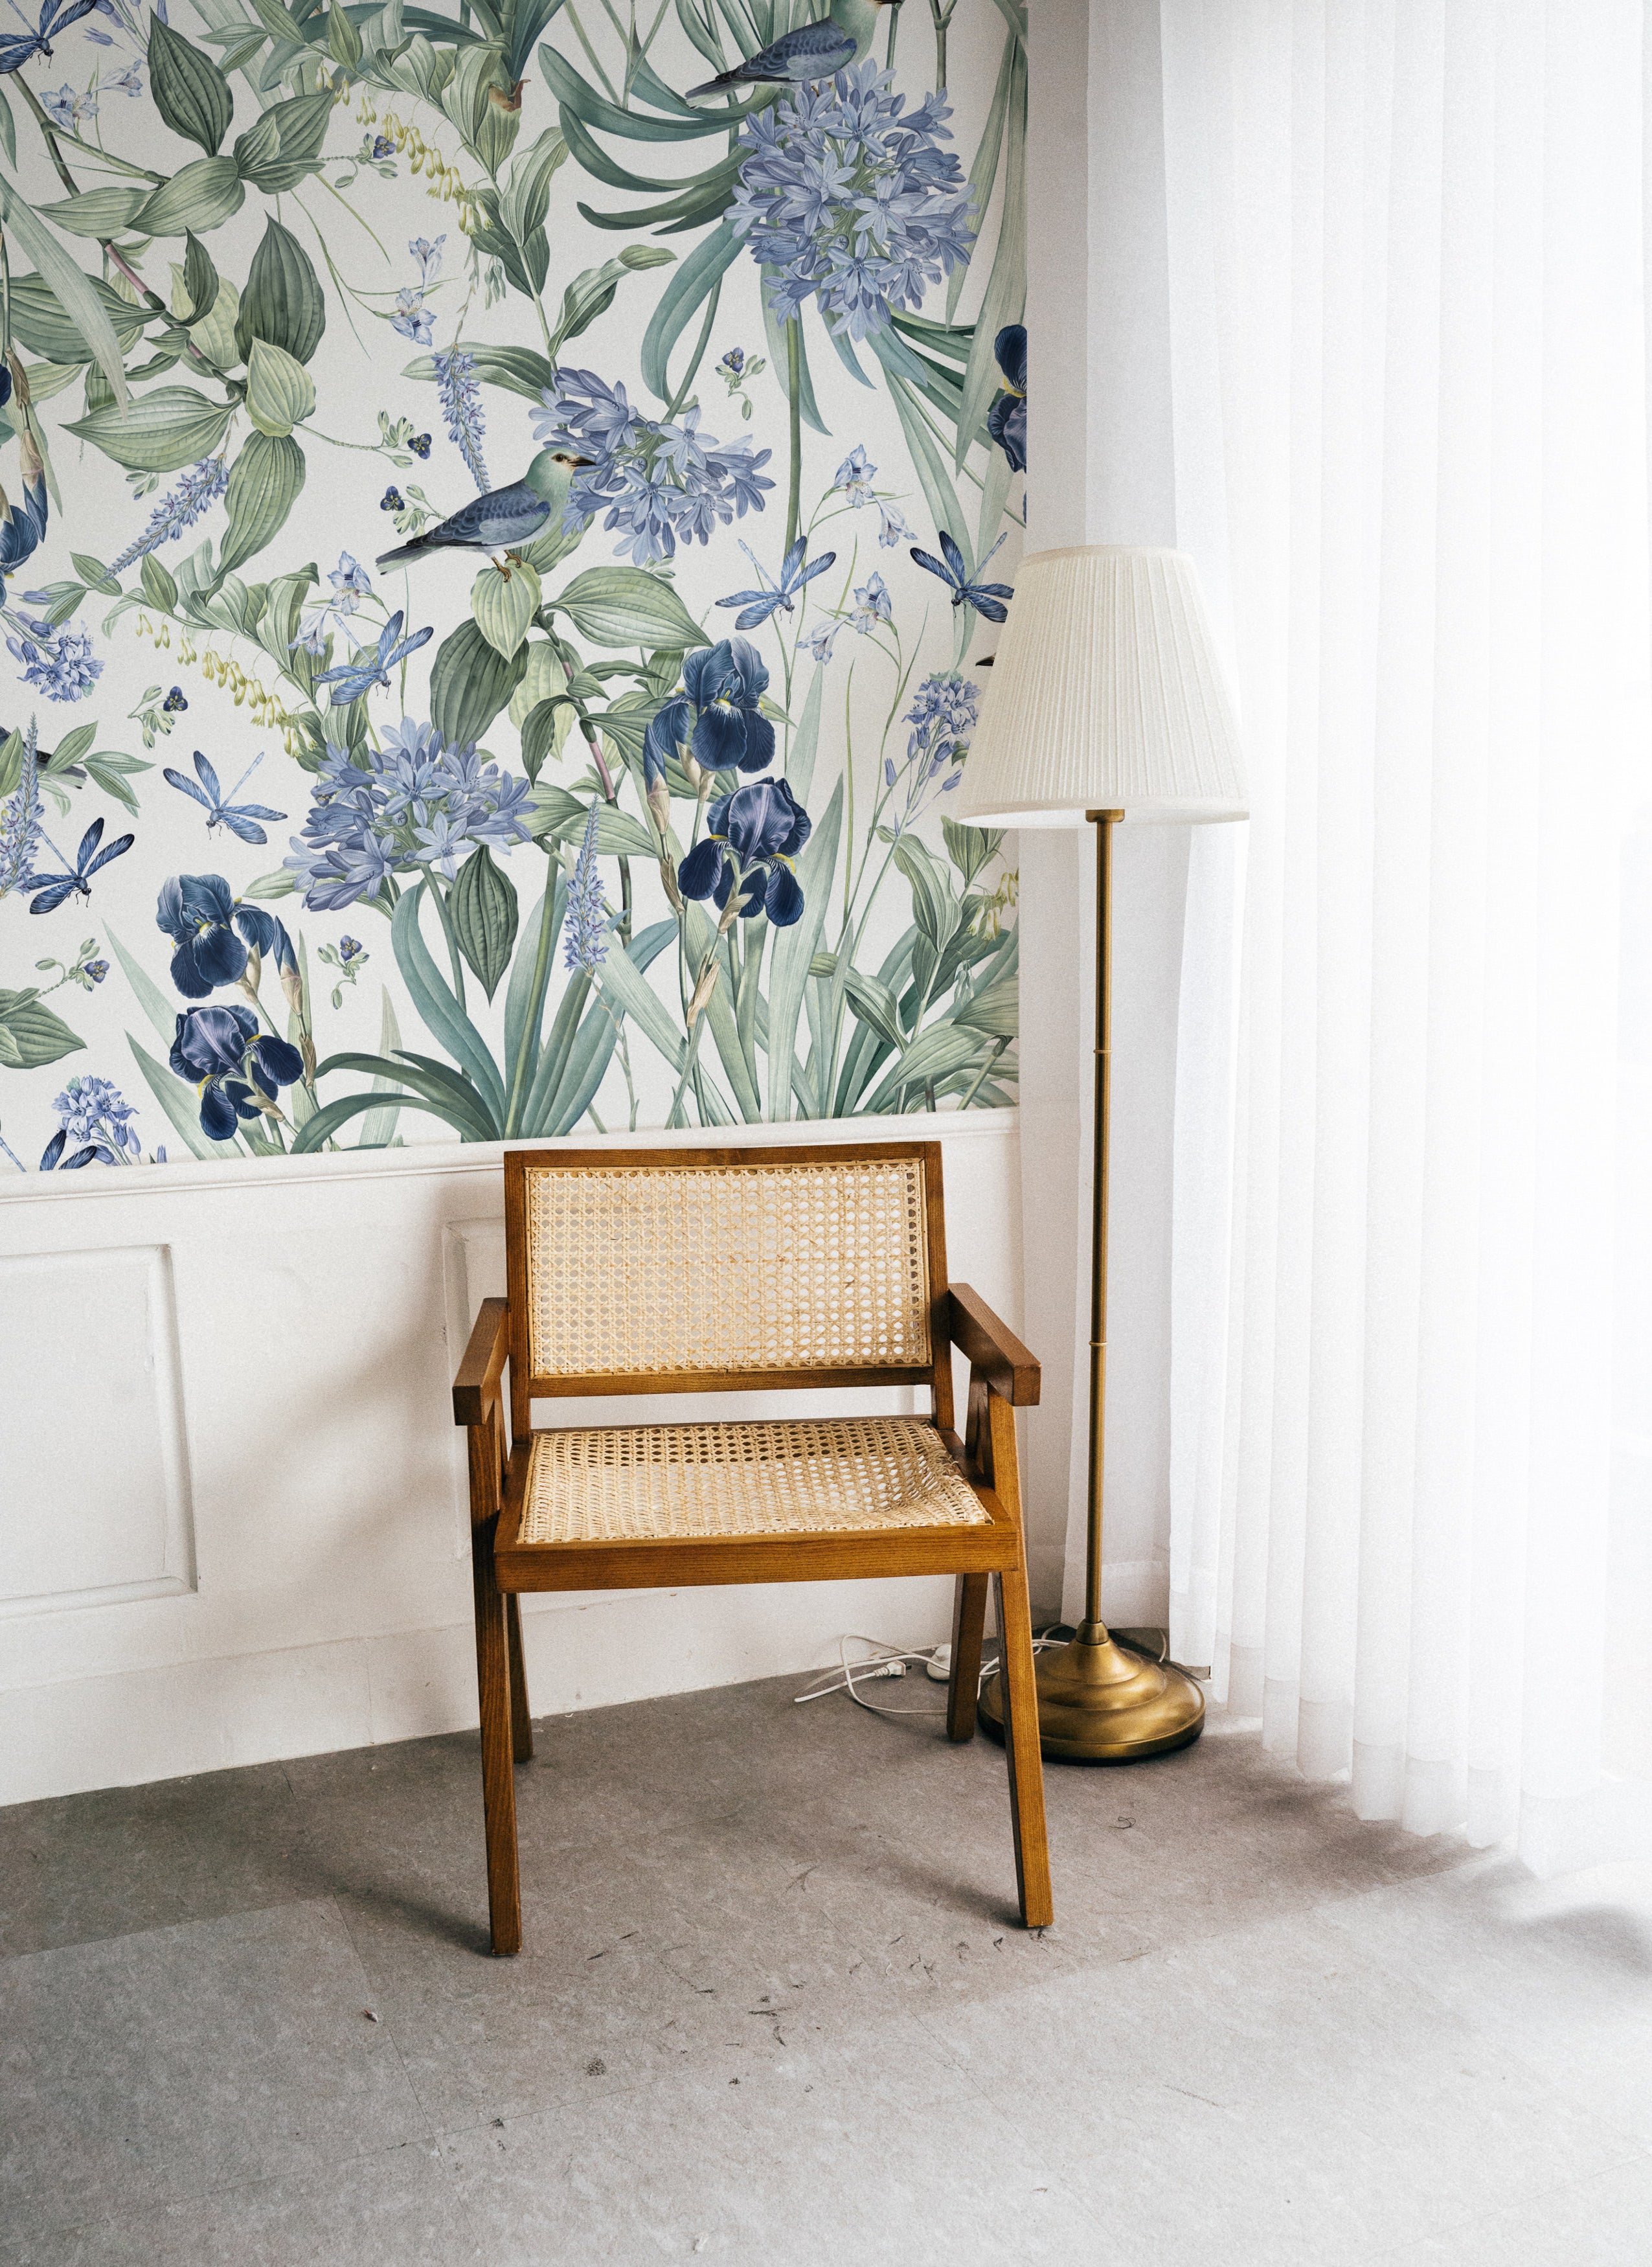 A cozy reading nook with the 'Mint Floral Wallpaper - 50"' adorning the wall, accompanied by a vintage wooden chair with wicker seating and a classic floor lamp, creating an inviting and warm atmosphere.